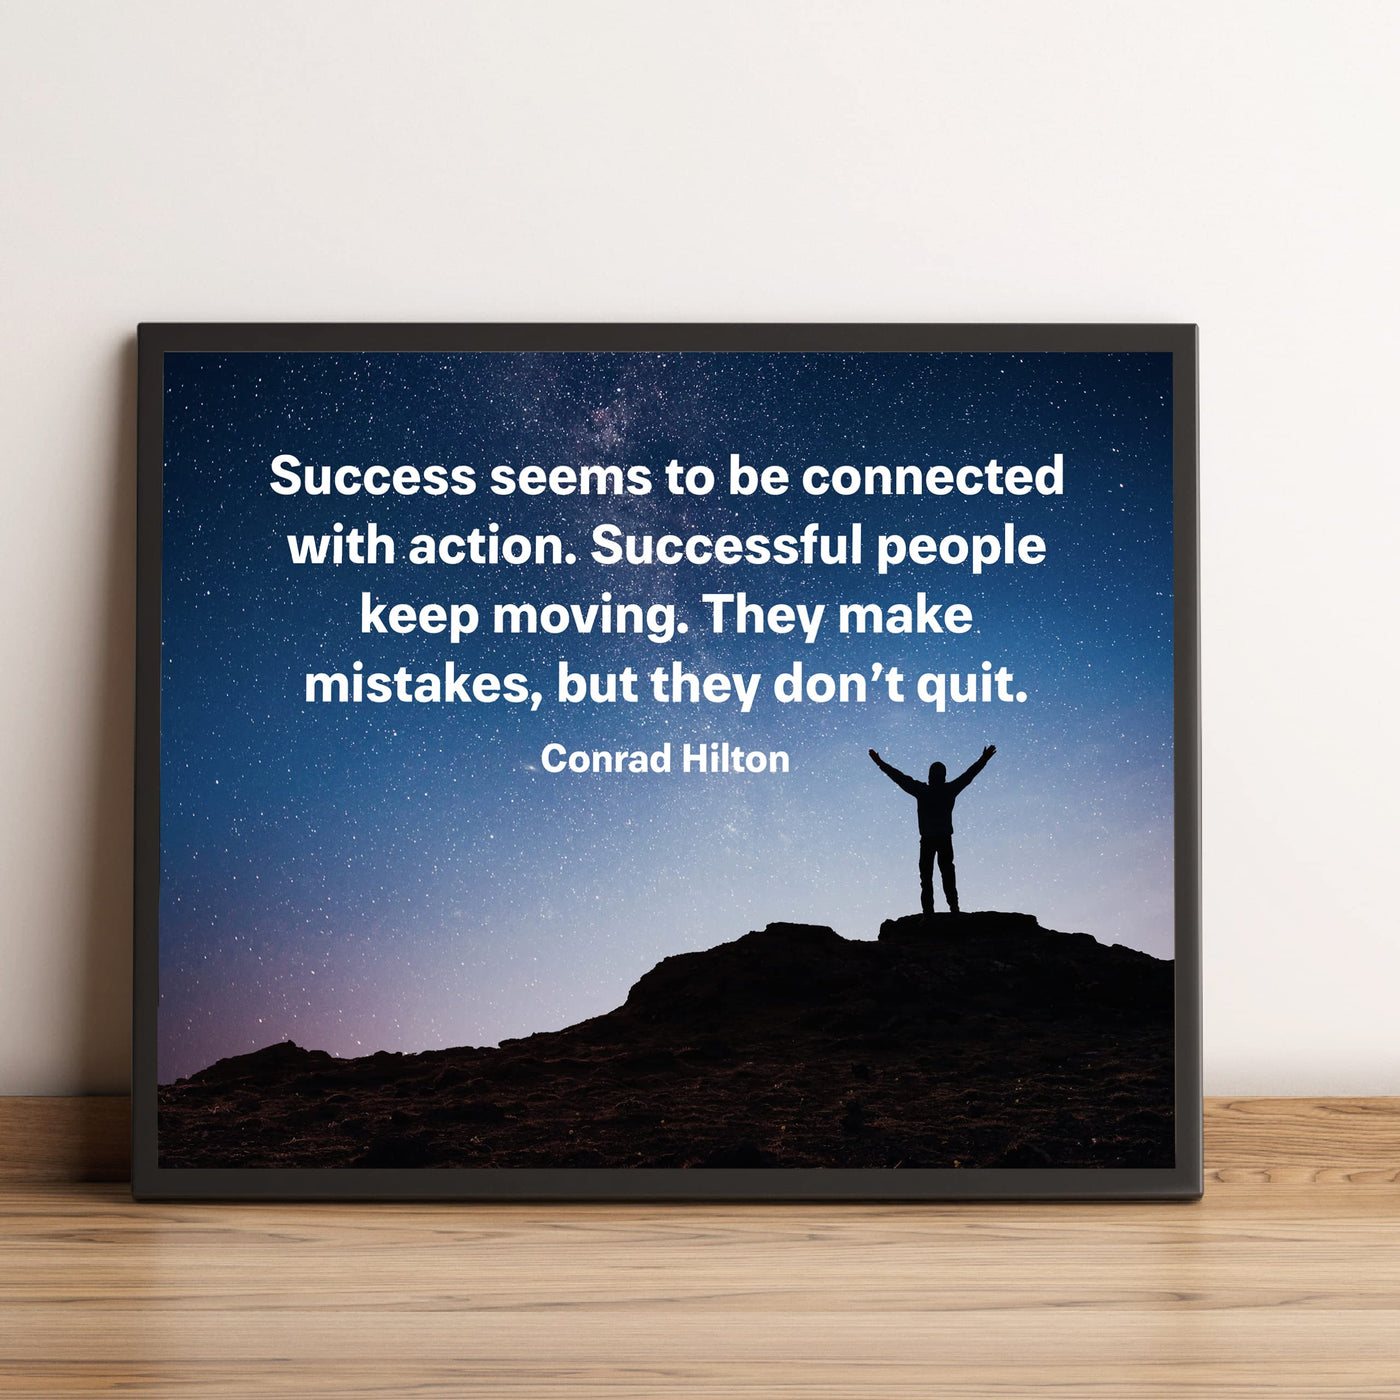 Conrad Hilton-"Success Connected With Action" Motivational Quotes Wall Art Decor-10 x 8" Starry Night Picture Print -Ready to Frame. Inspirational Home-Office-Work Decor. Great Gift of Motivation!